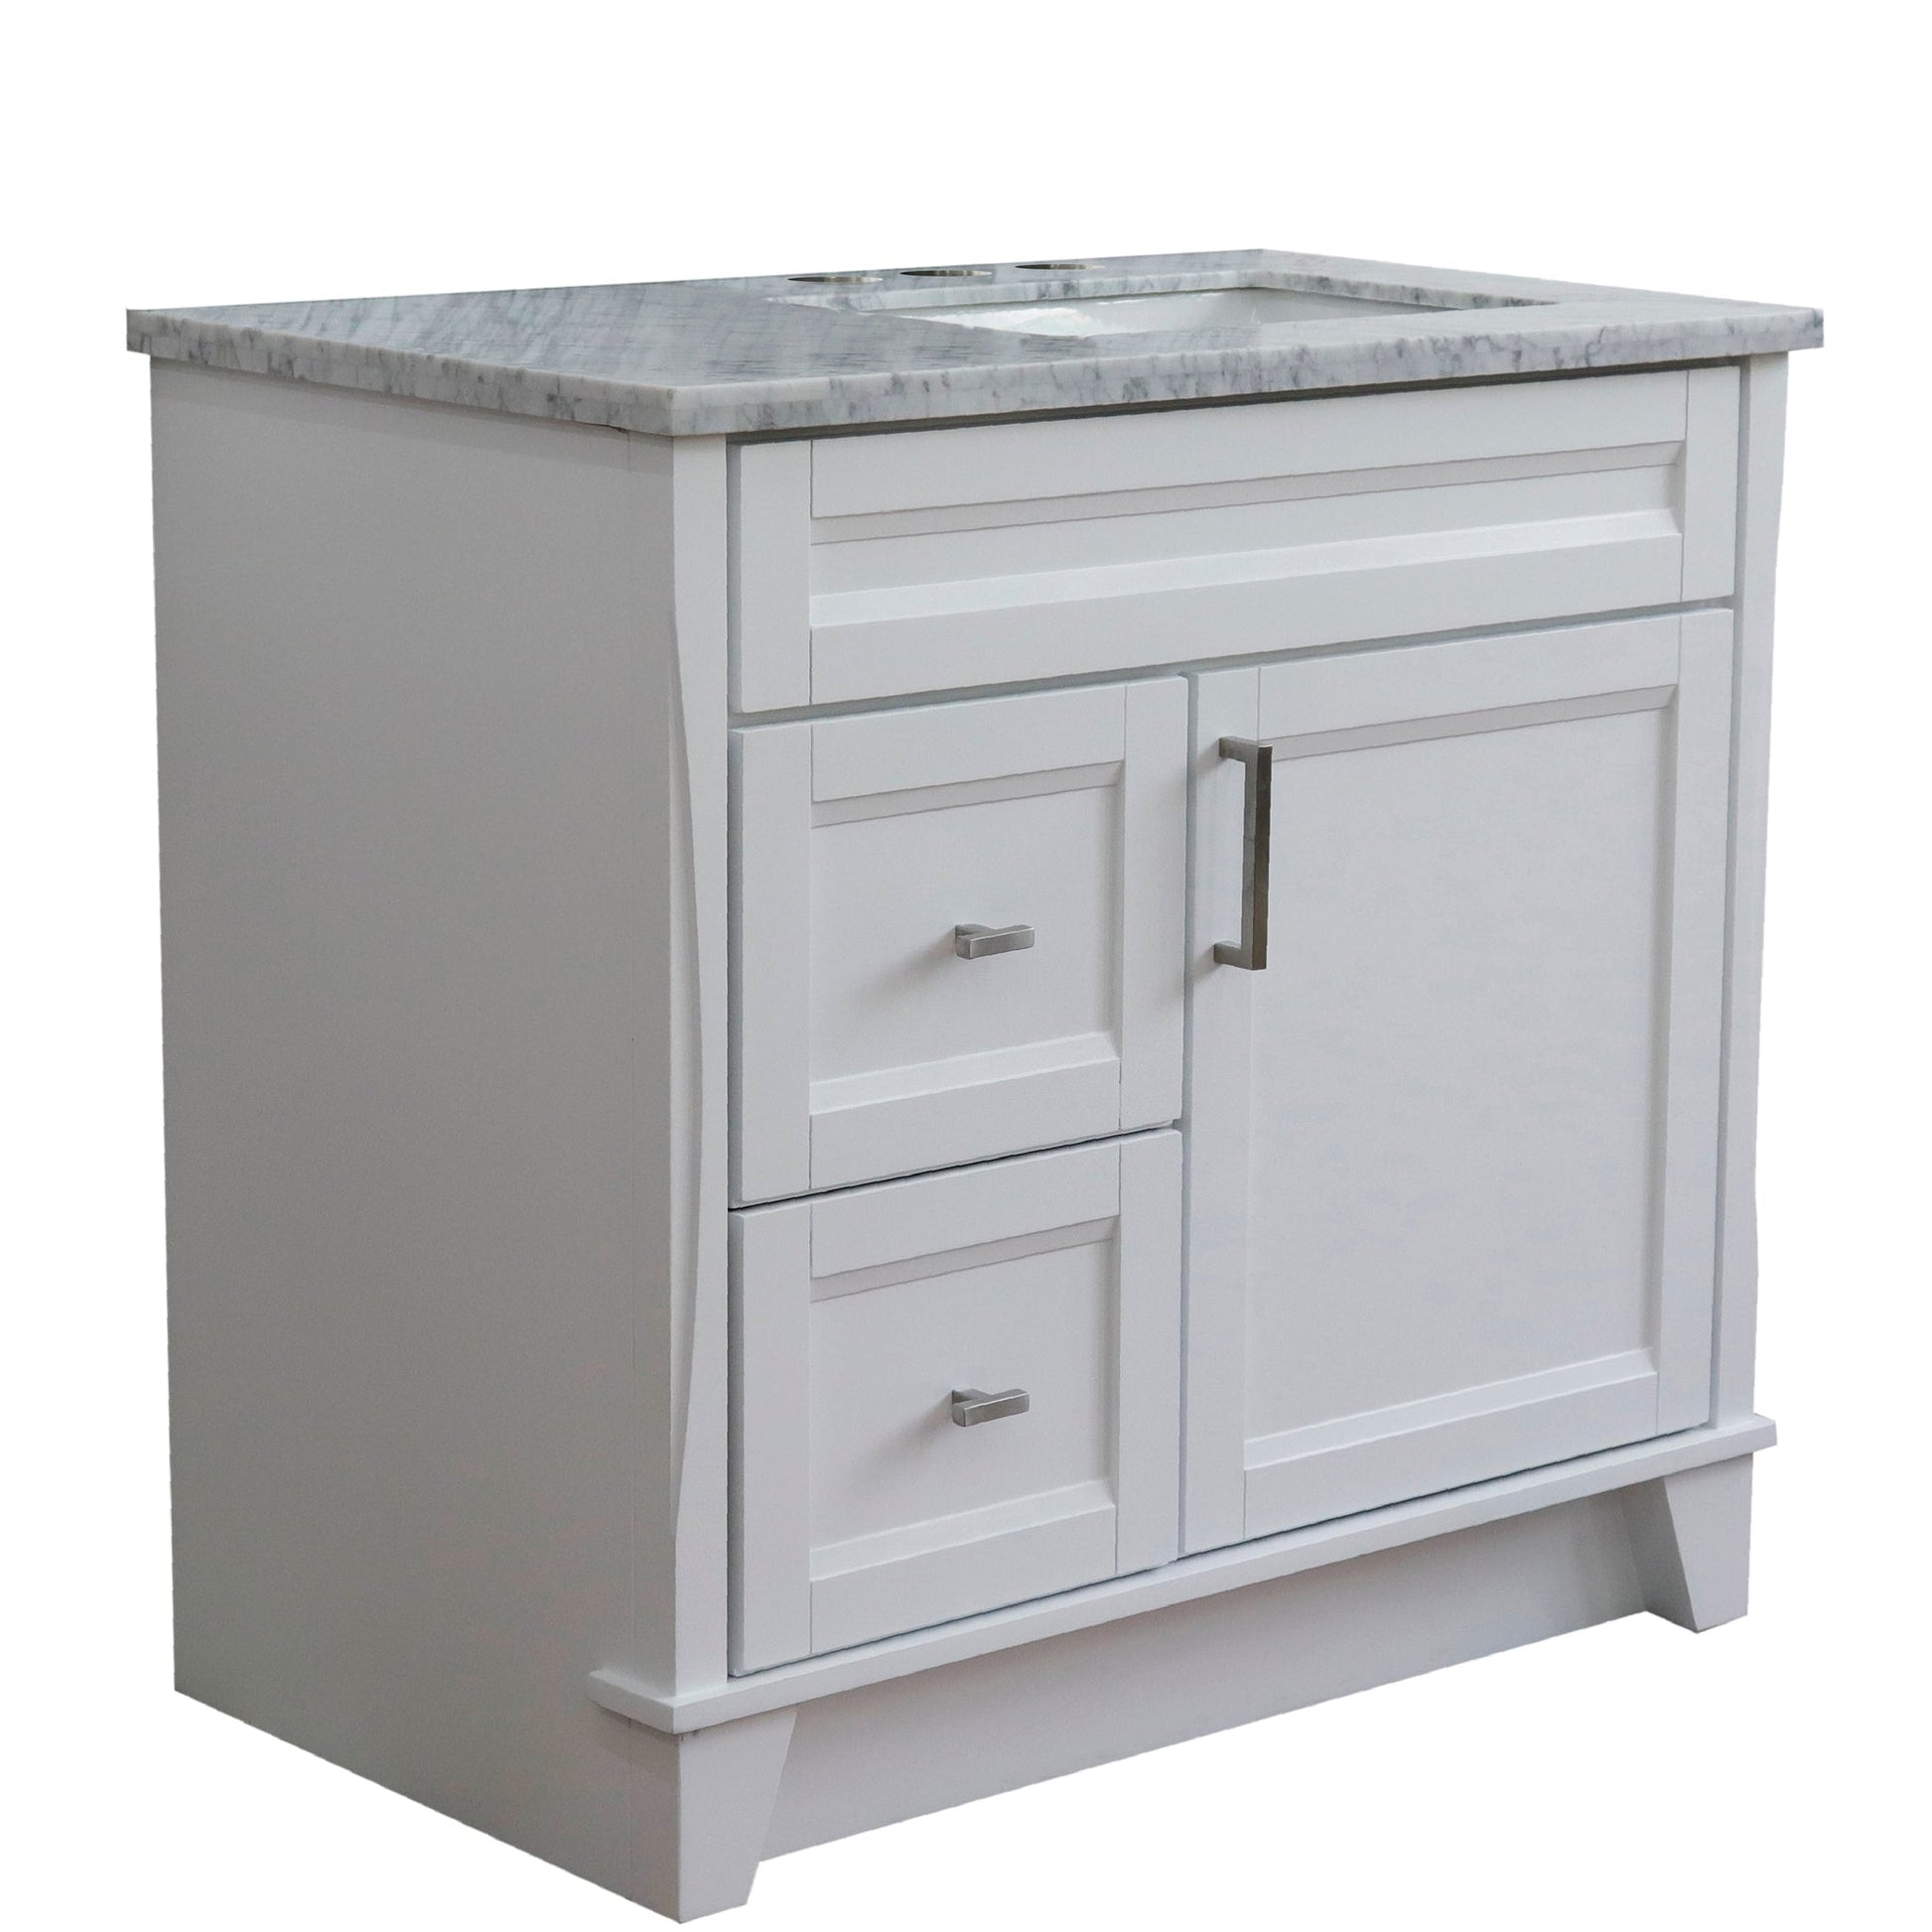 Bellaterra Home Terni 37" 1-Door 2-Drawer White Freestanding Vanity Set With Ceramic Right Offset Undermount Rectangular Sink and White Carrara Marble Top, and Right Door Base